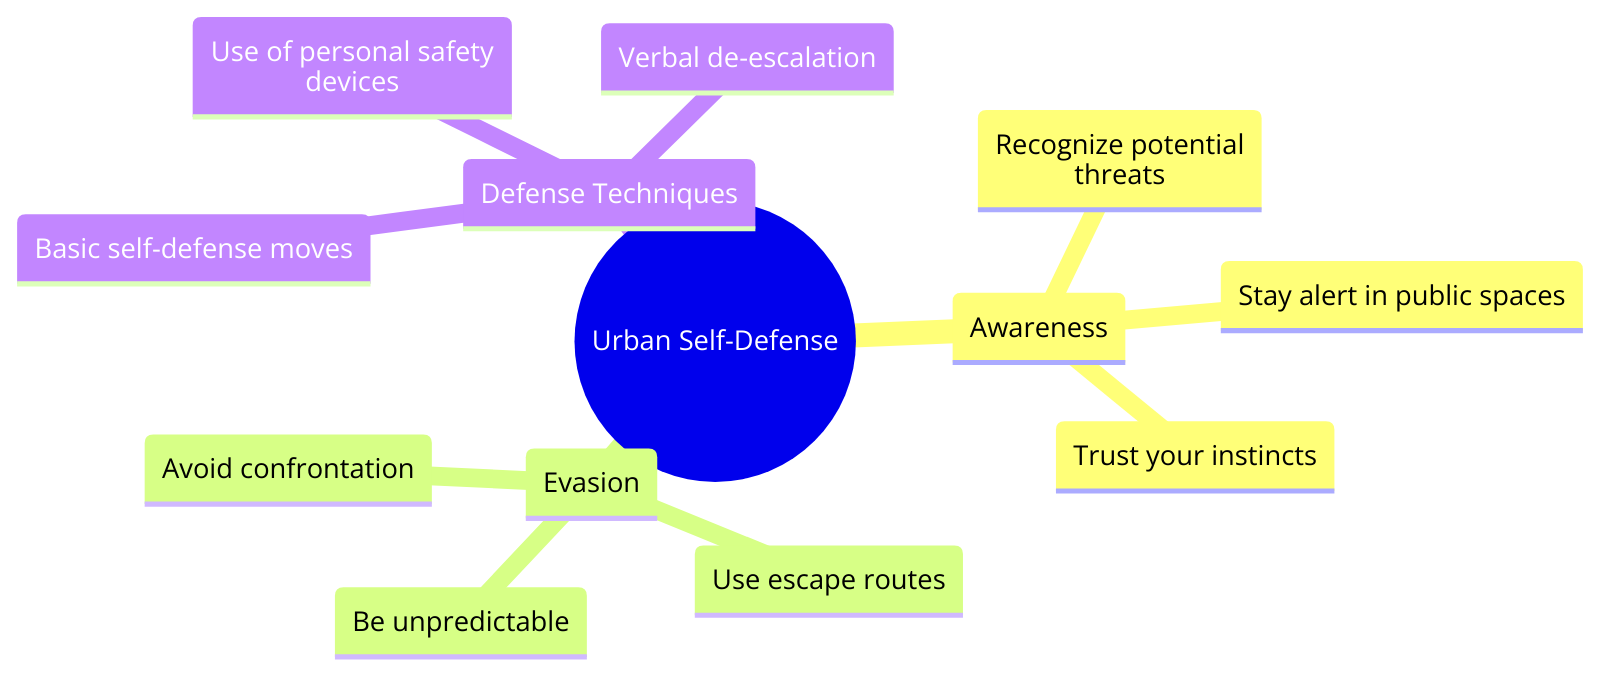 key aspects of urban self-defense, including awareness, evasion, and defense techniques